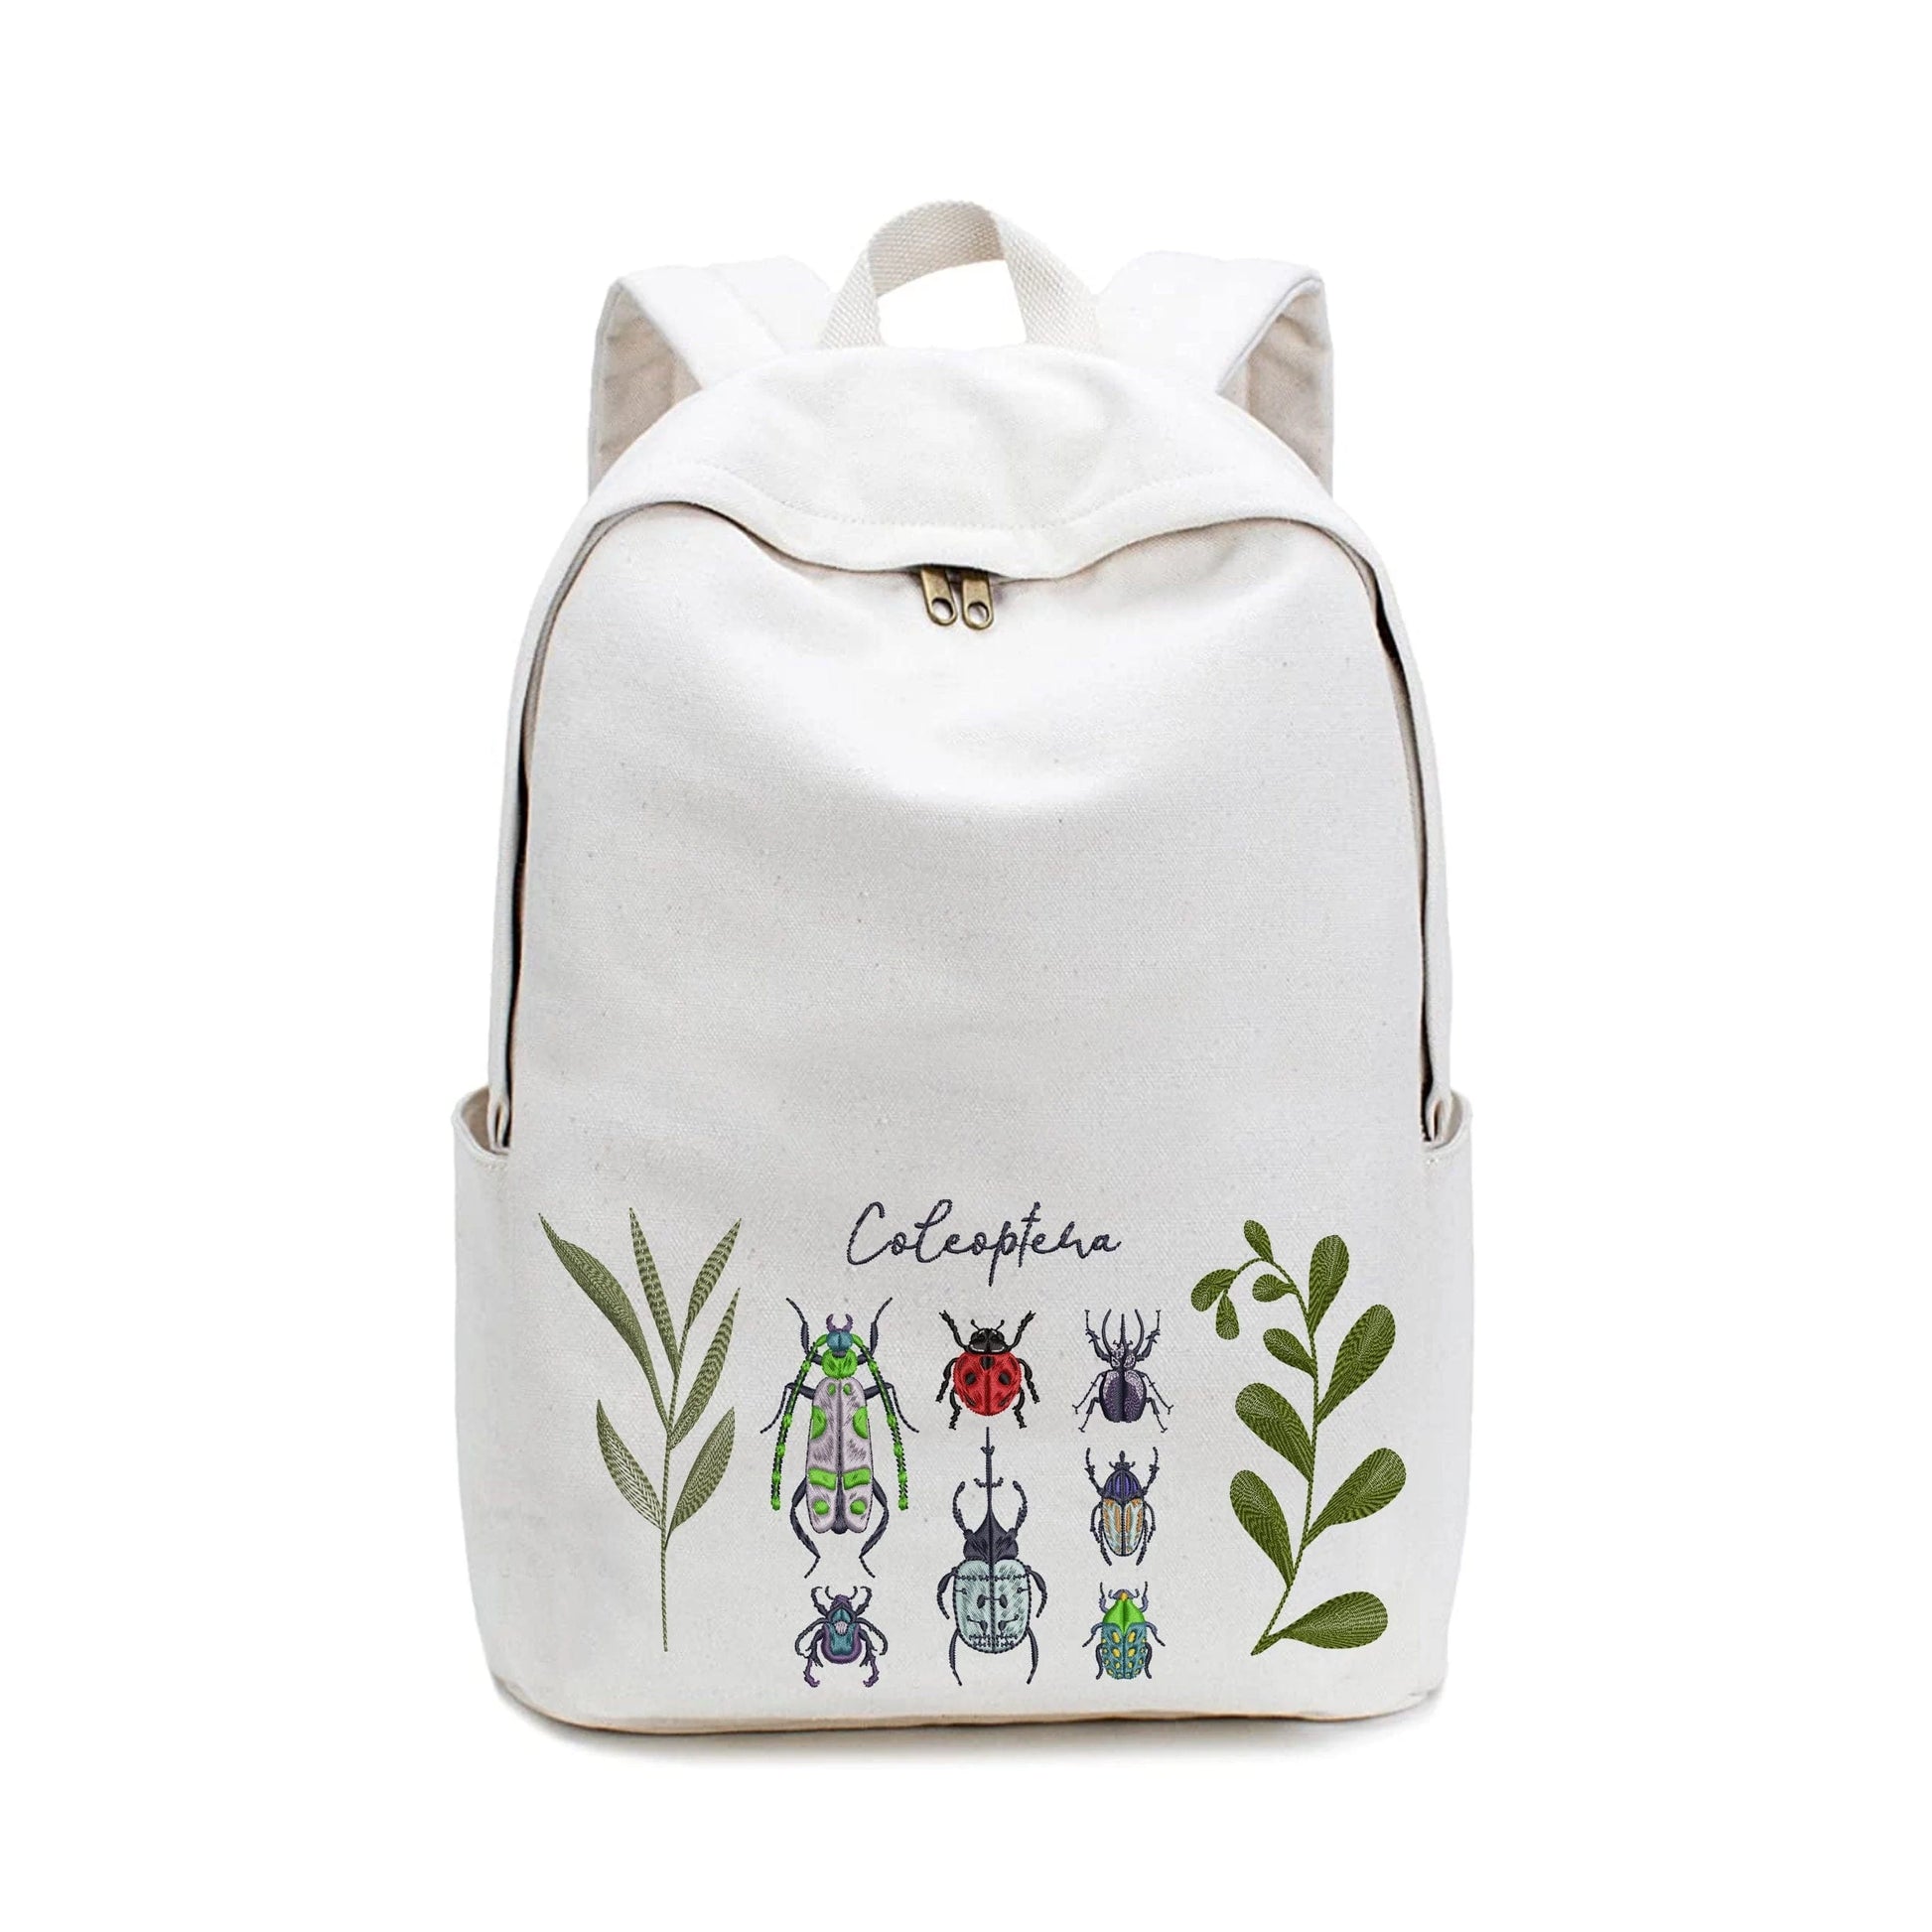 Beetle Insects Machine Embroidery Design Bundle on backpack